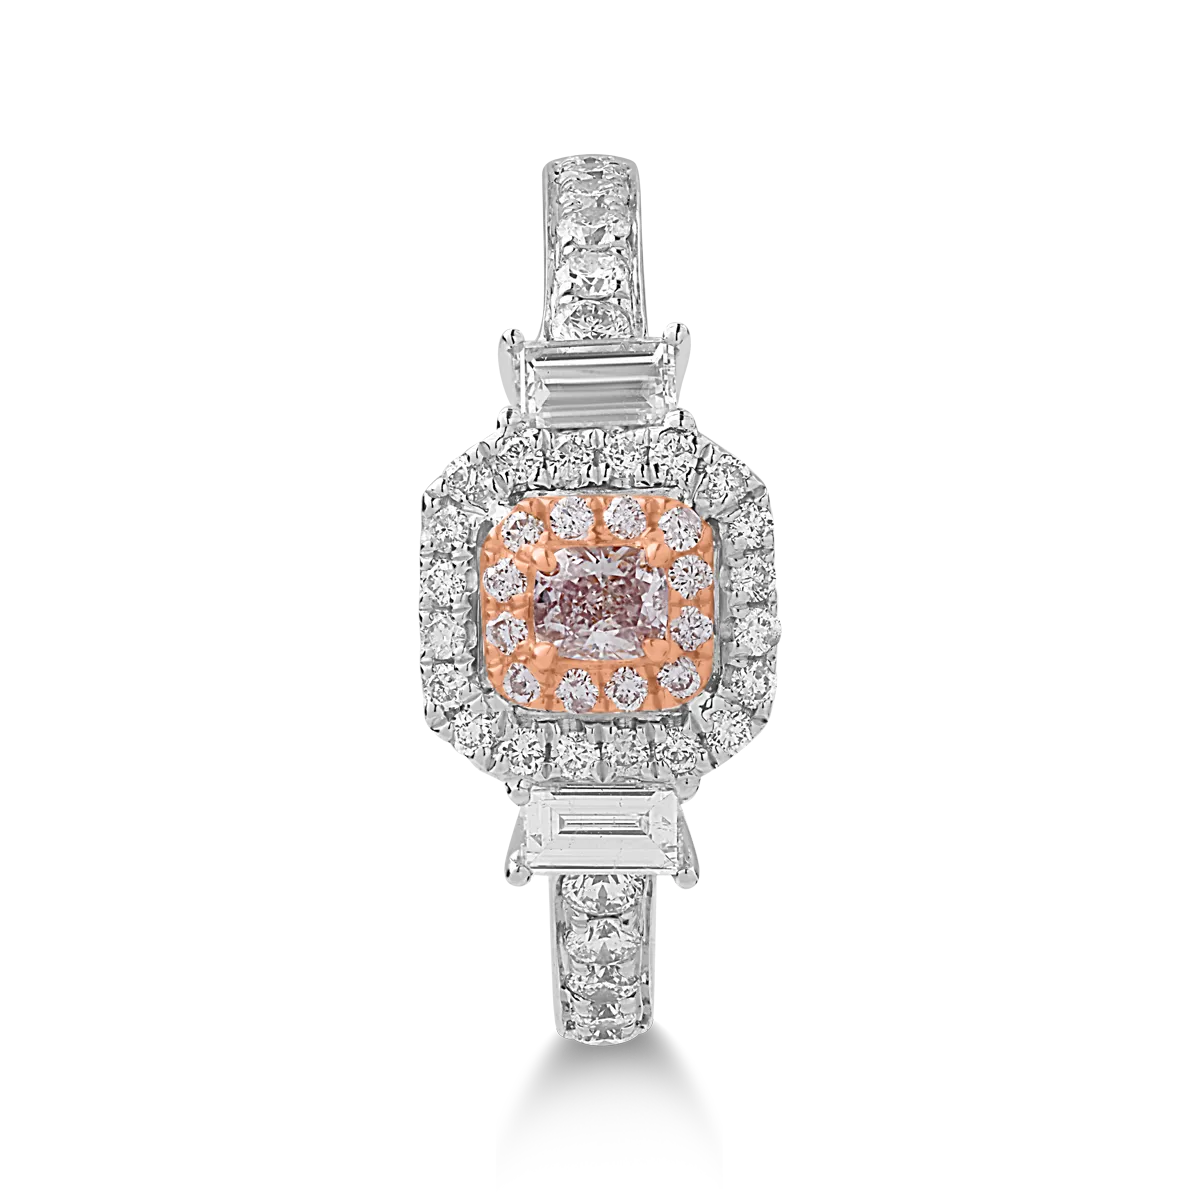 18K white-rose gold ring with 0.25ct pink diamonds and 0.71ct clear diamonds